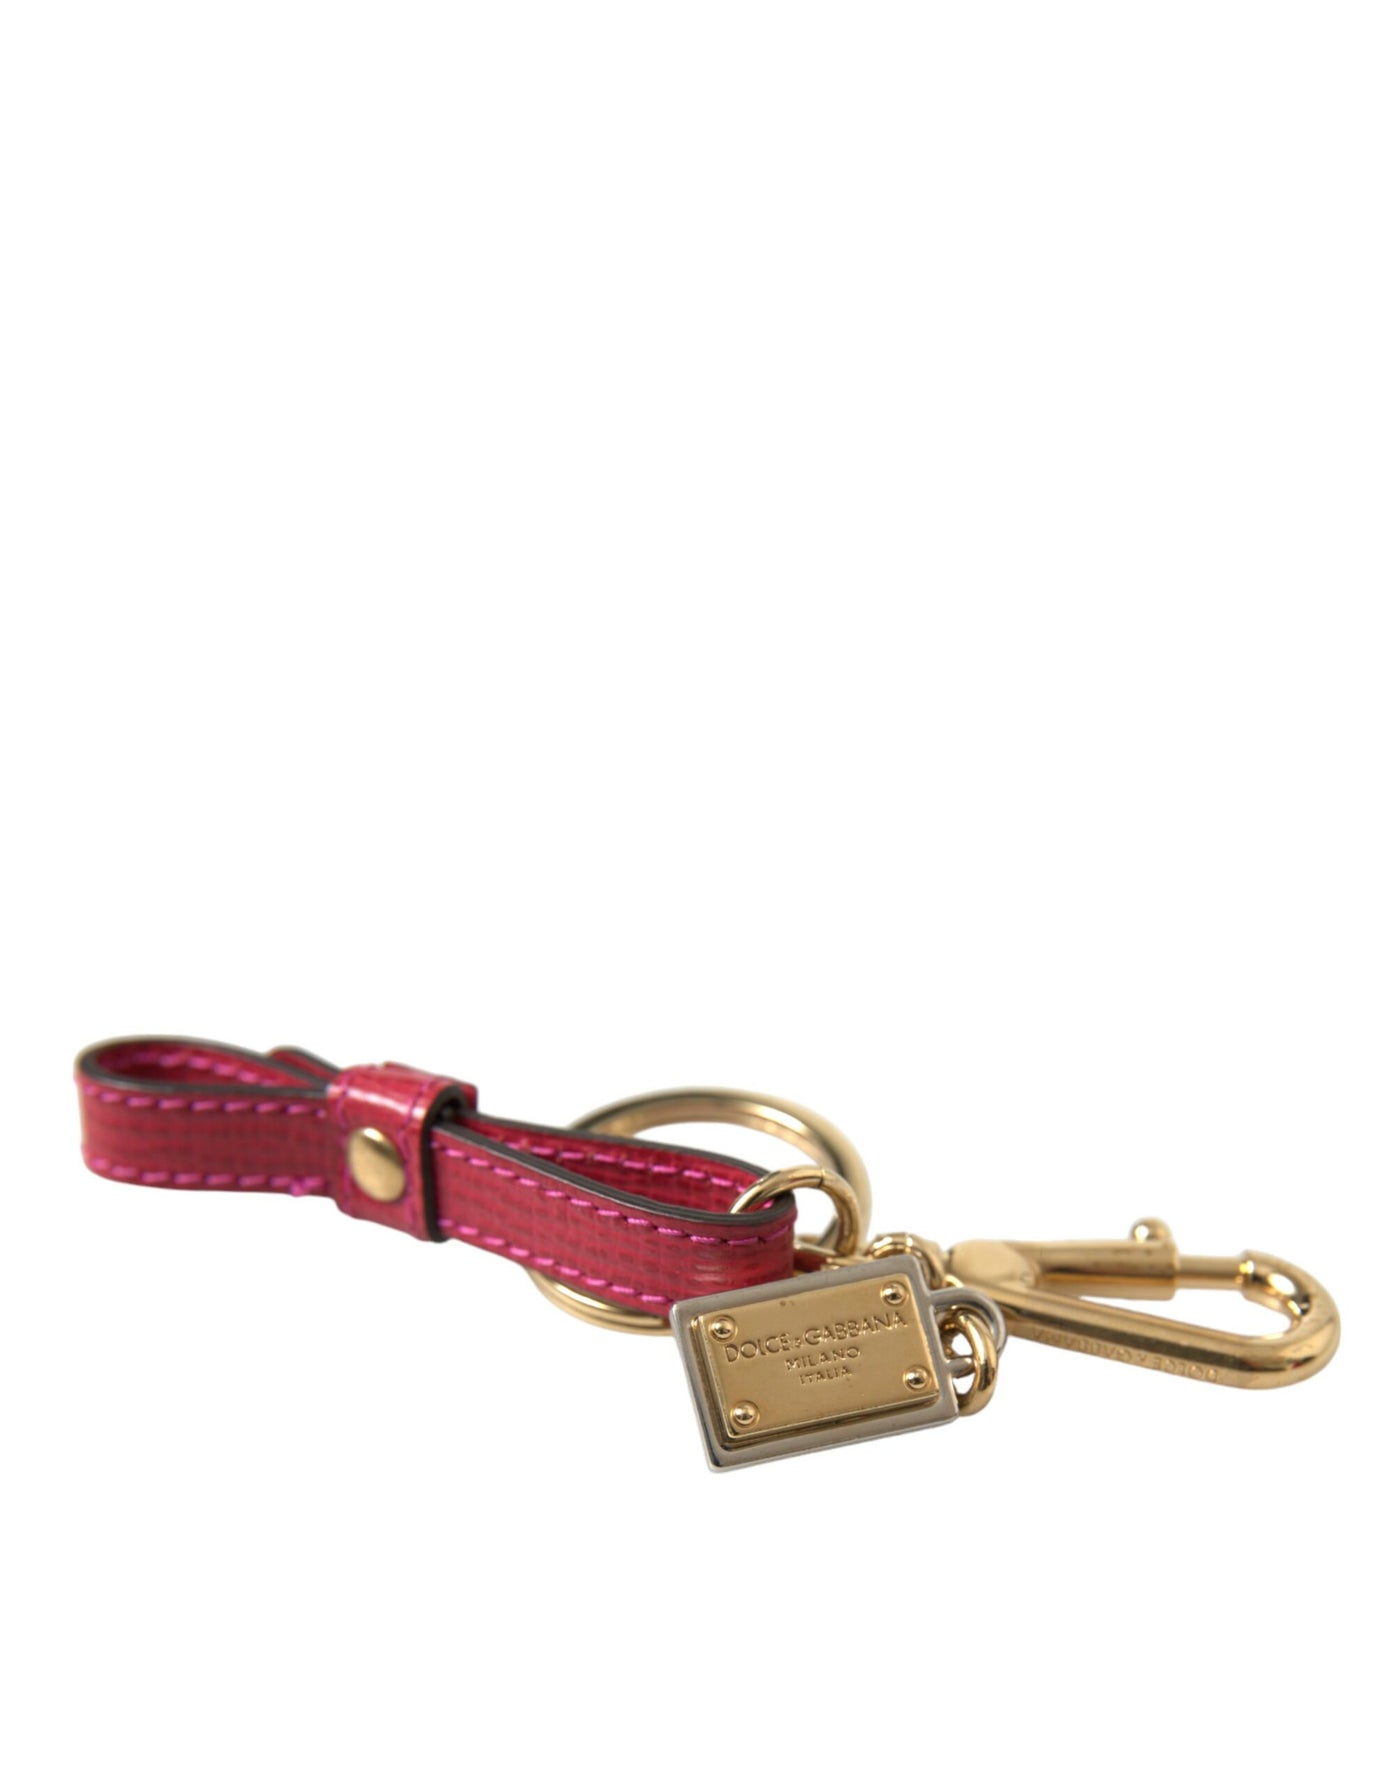 Dolce & Gabbana Red Calf Leather Gold Metal Logo Plaque Keyring Keychain